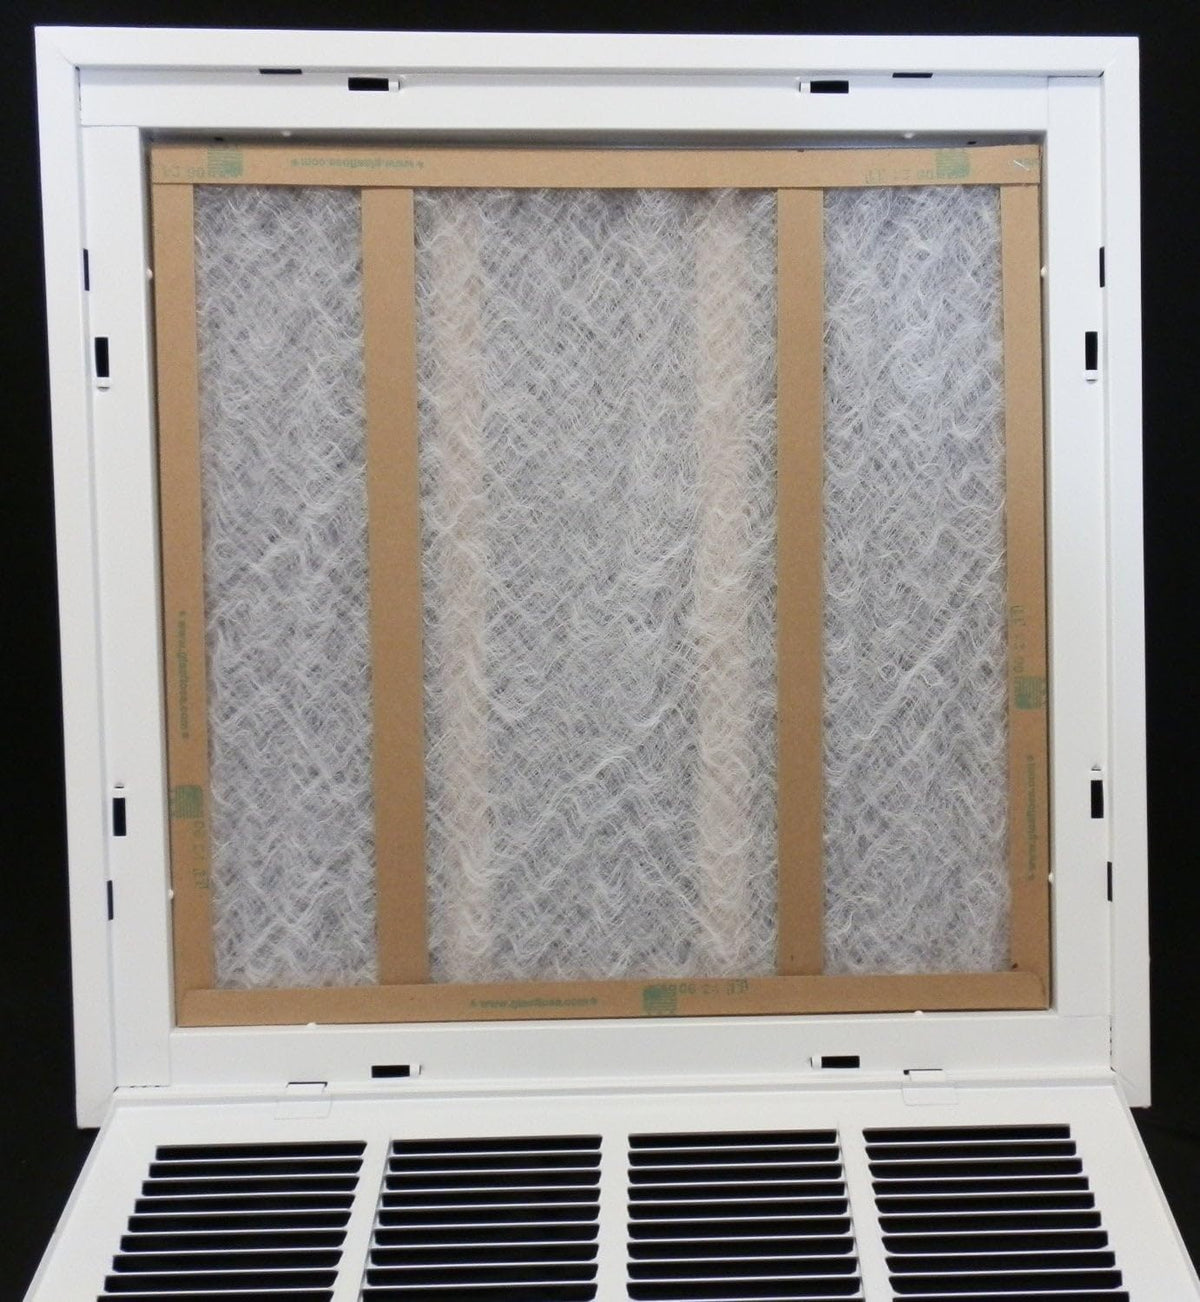 20&quot; X 10&quot; Steel Return Air Filter Grille for 1&quot; Filter - Removable Frame - * Filter Included * [Outer Dimensions: 22 5/8&quot; X 12 5/8&quot;]